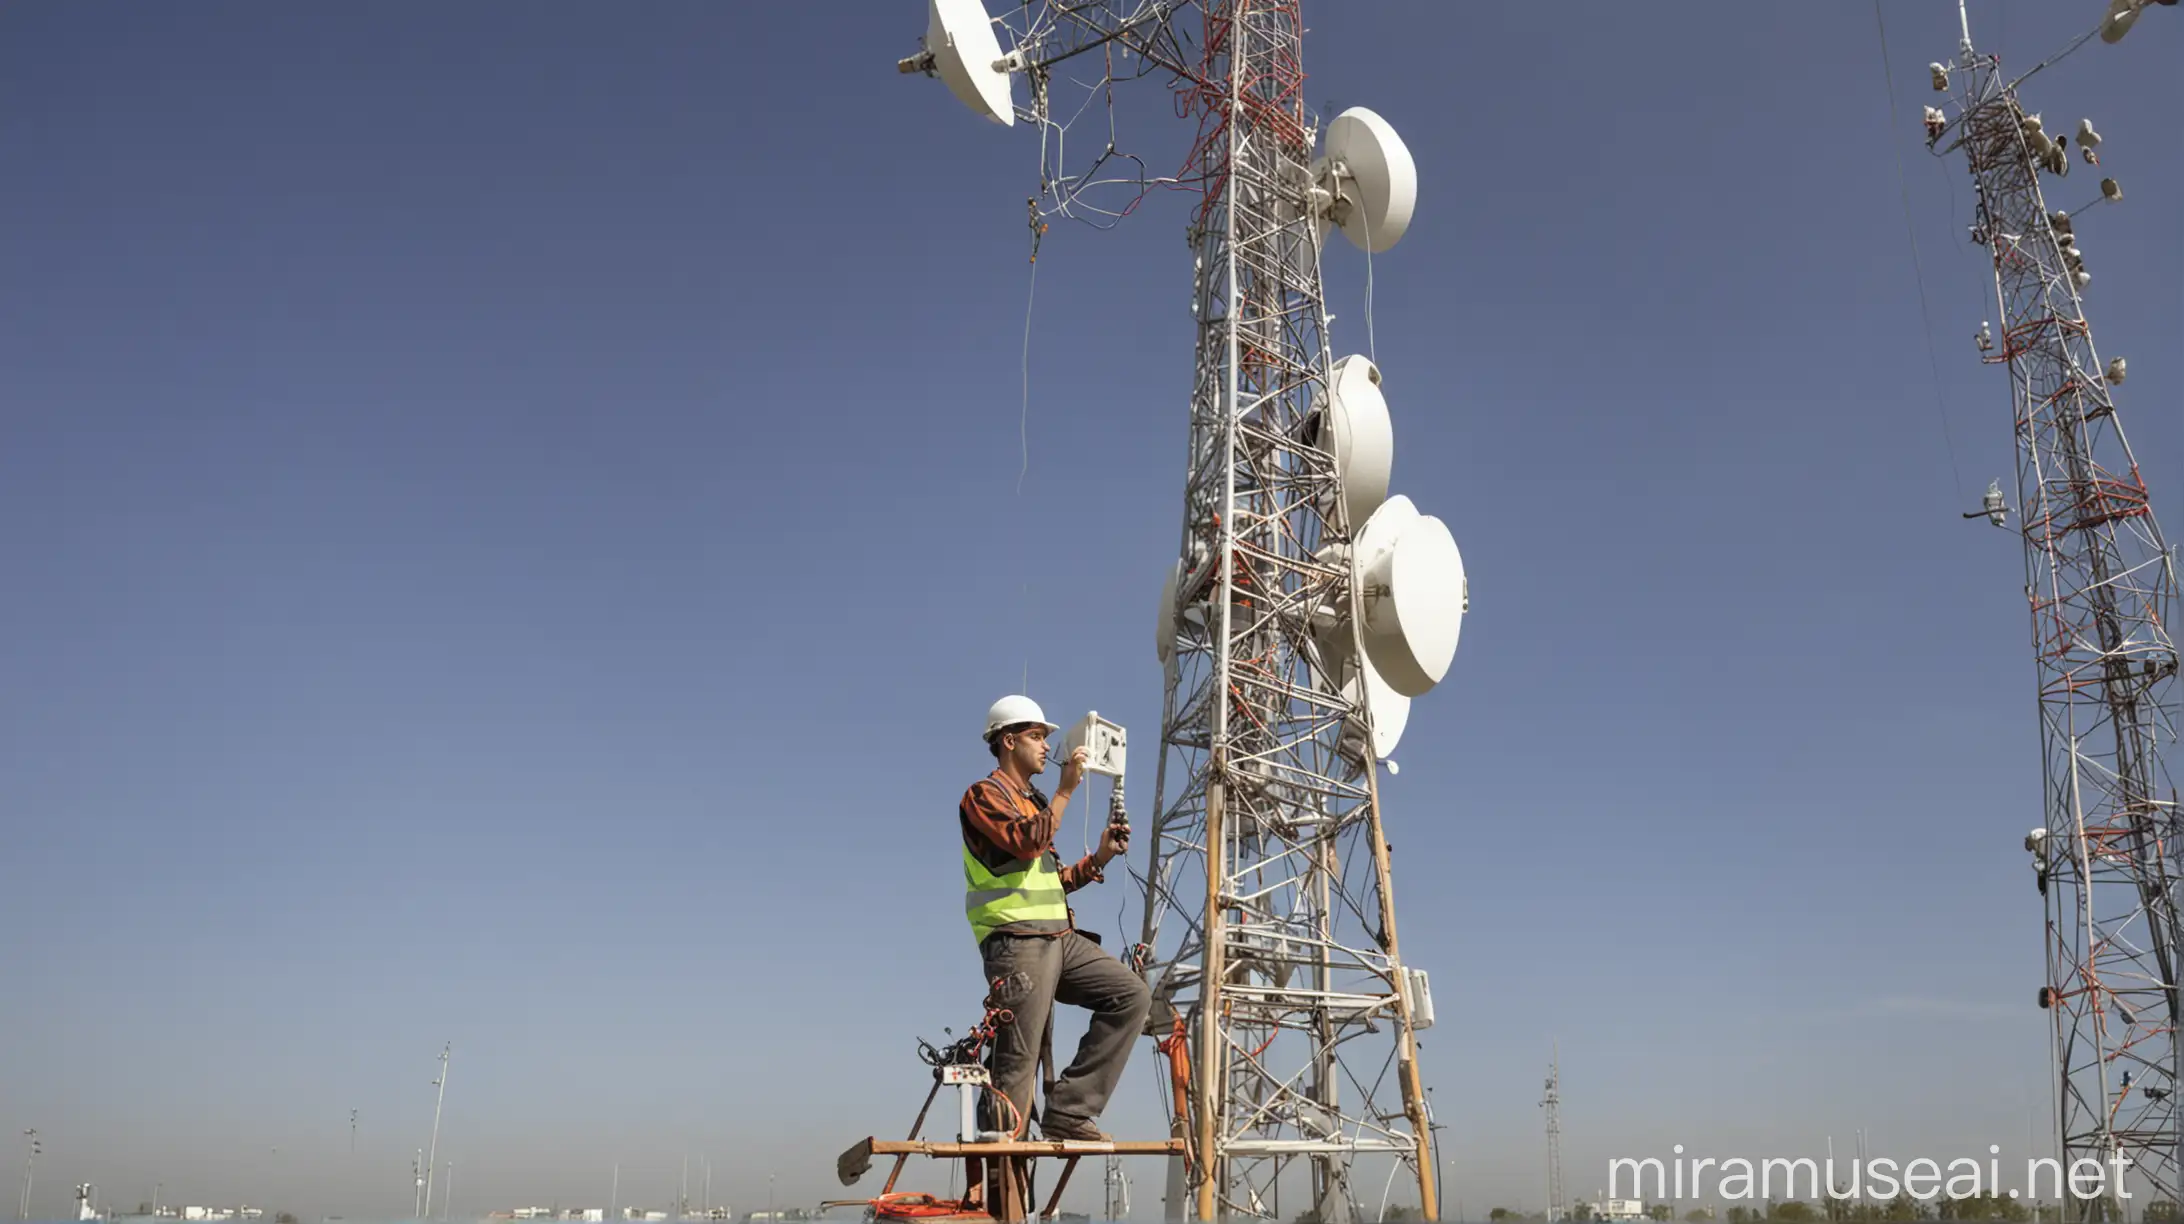 a telecom field engineer working in a telecom antenna, outside